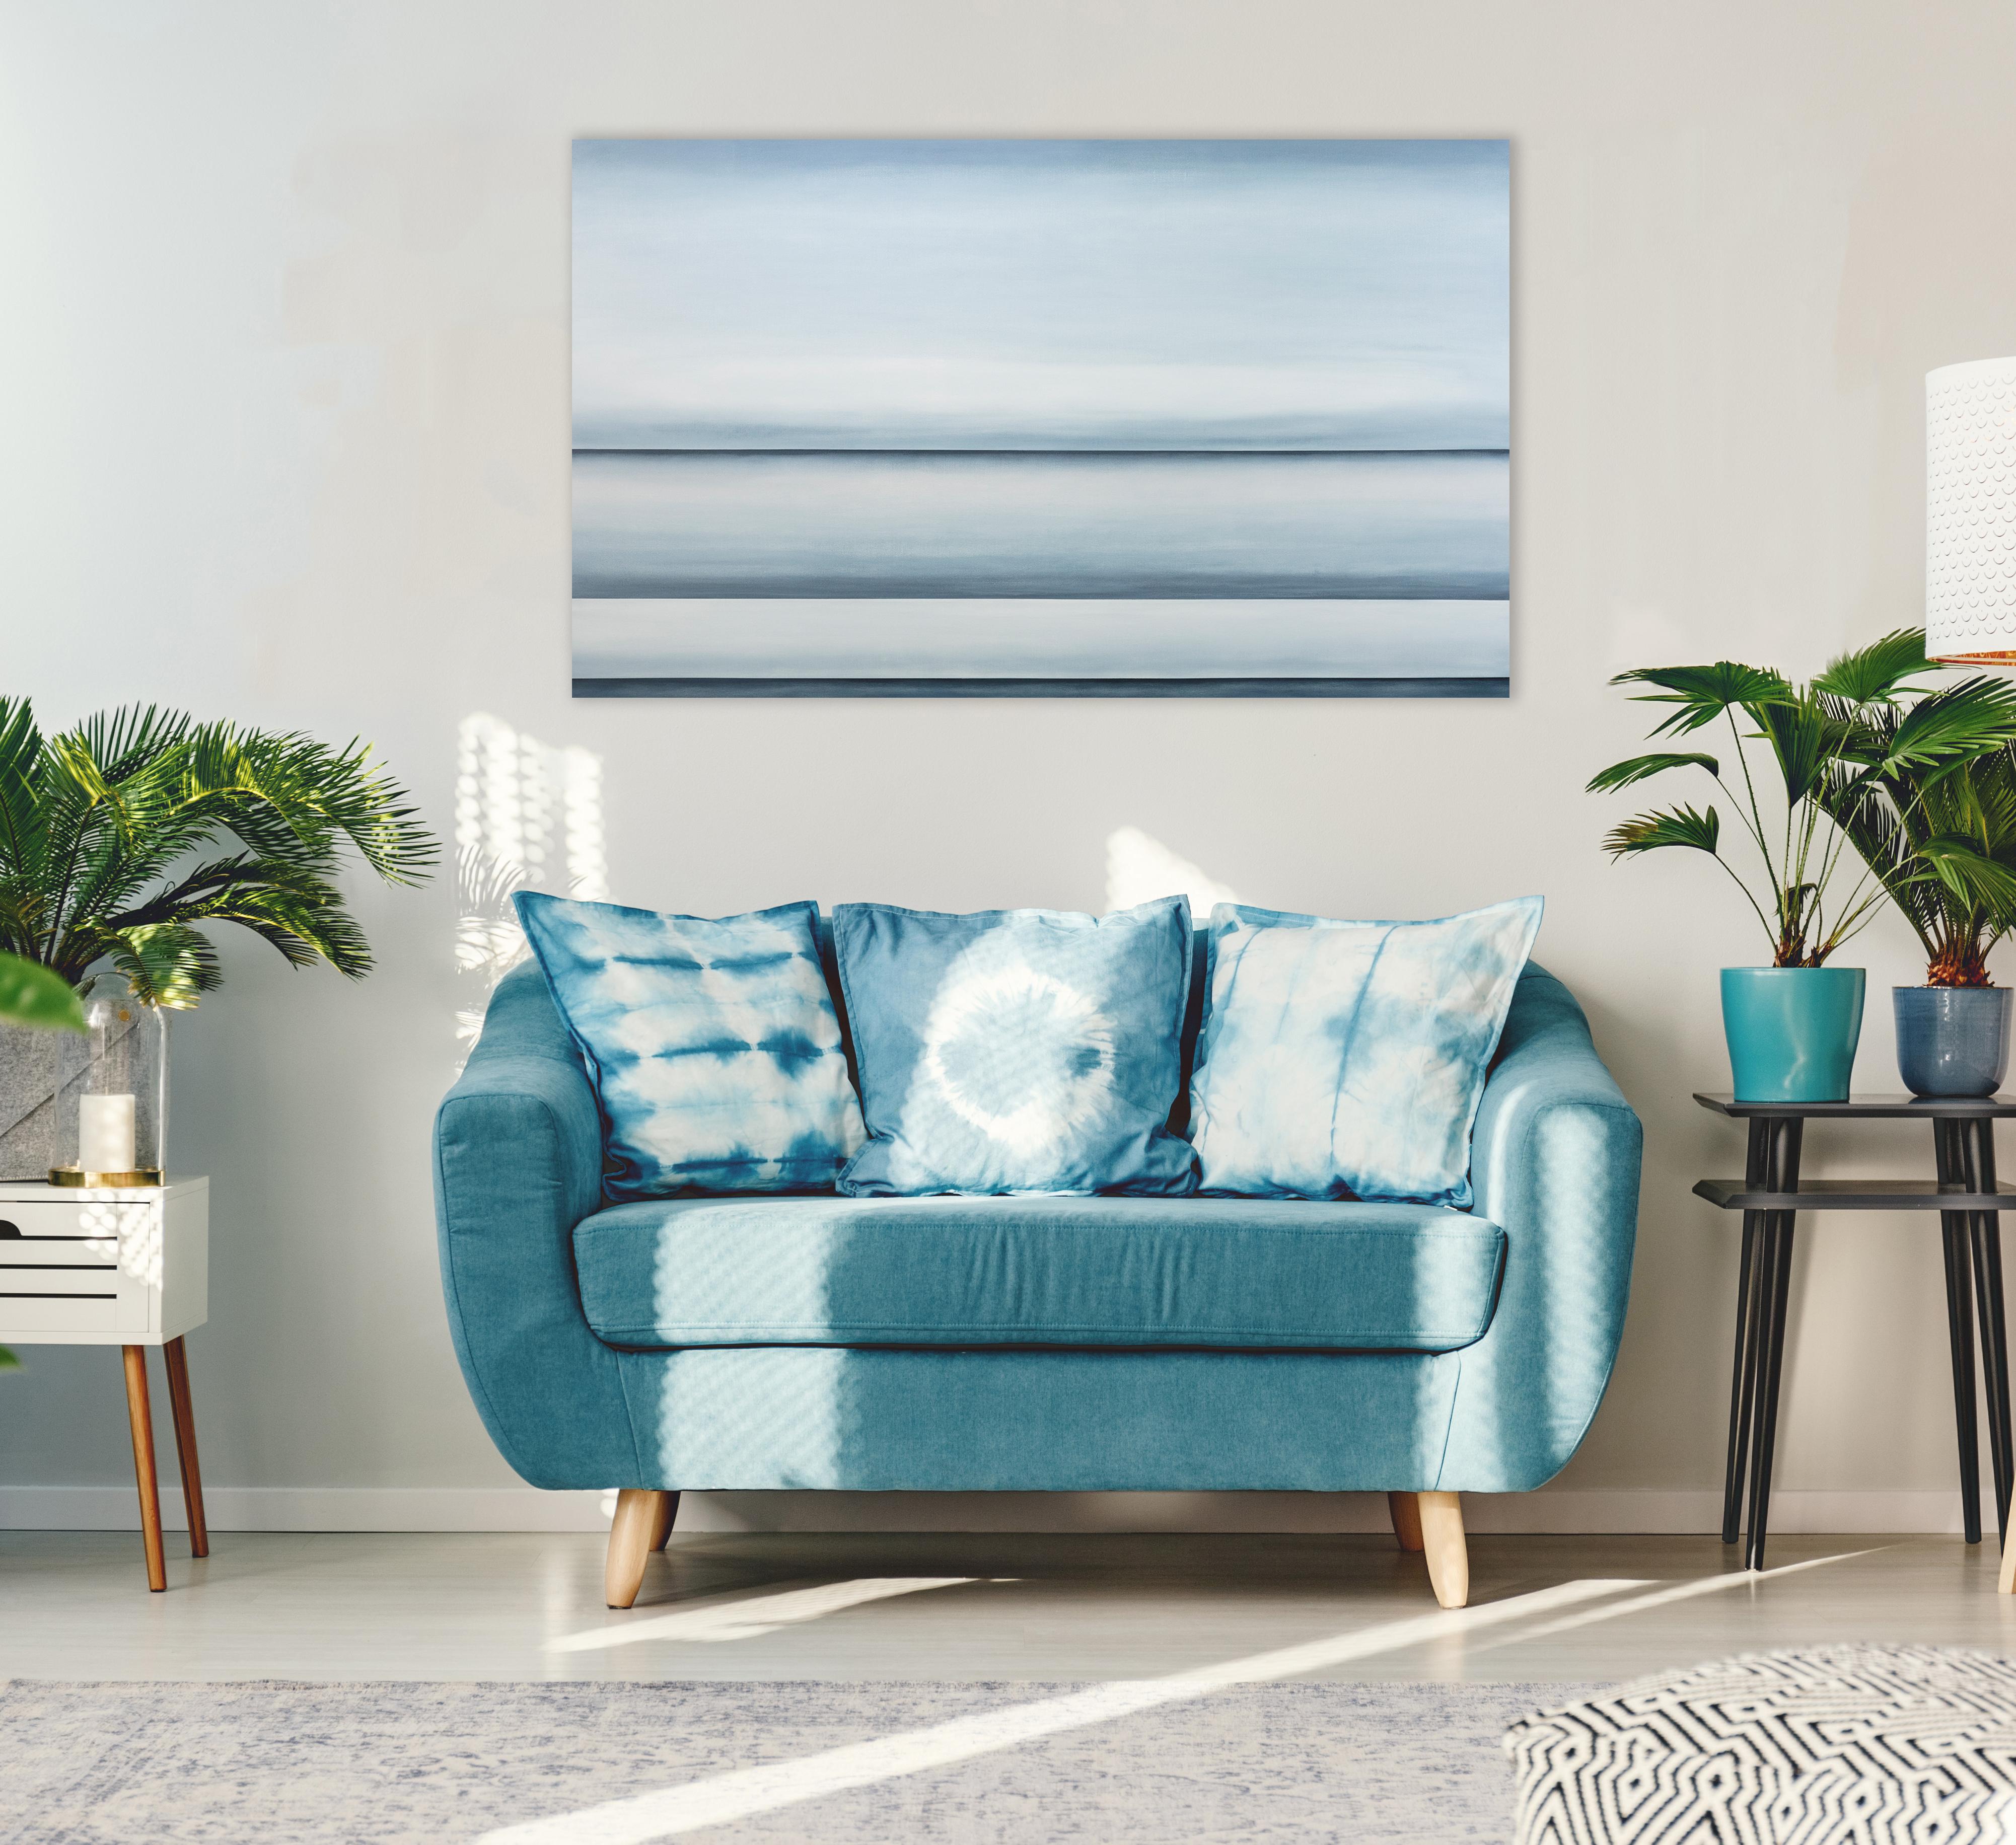 This abstract oil painting by Tony Iadicicco features a blue monochromatic palette. The painting has an abstracted landscape composition, with three stark blue horizon lines running through the canvas and soft blue blended colors between each -